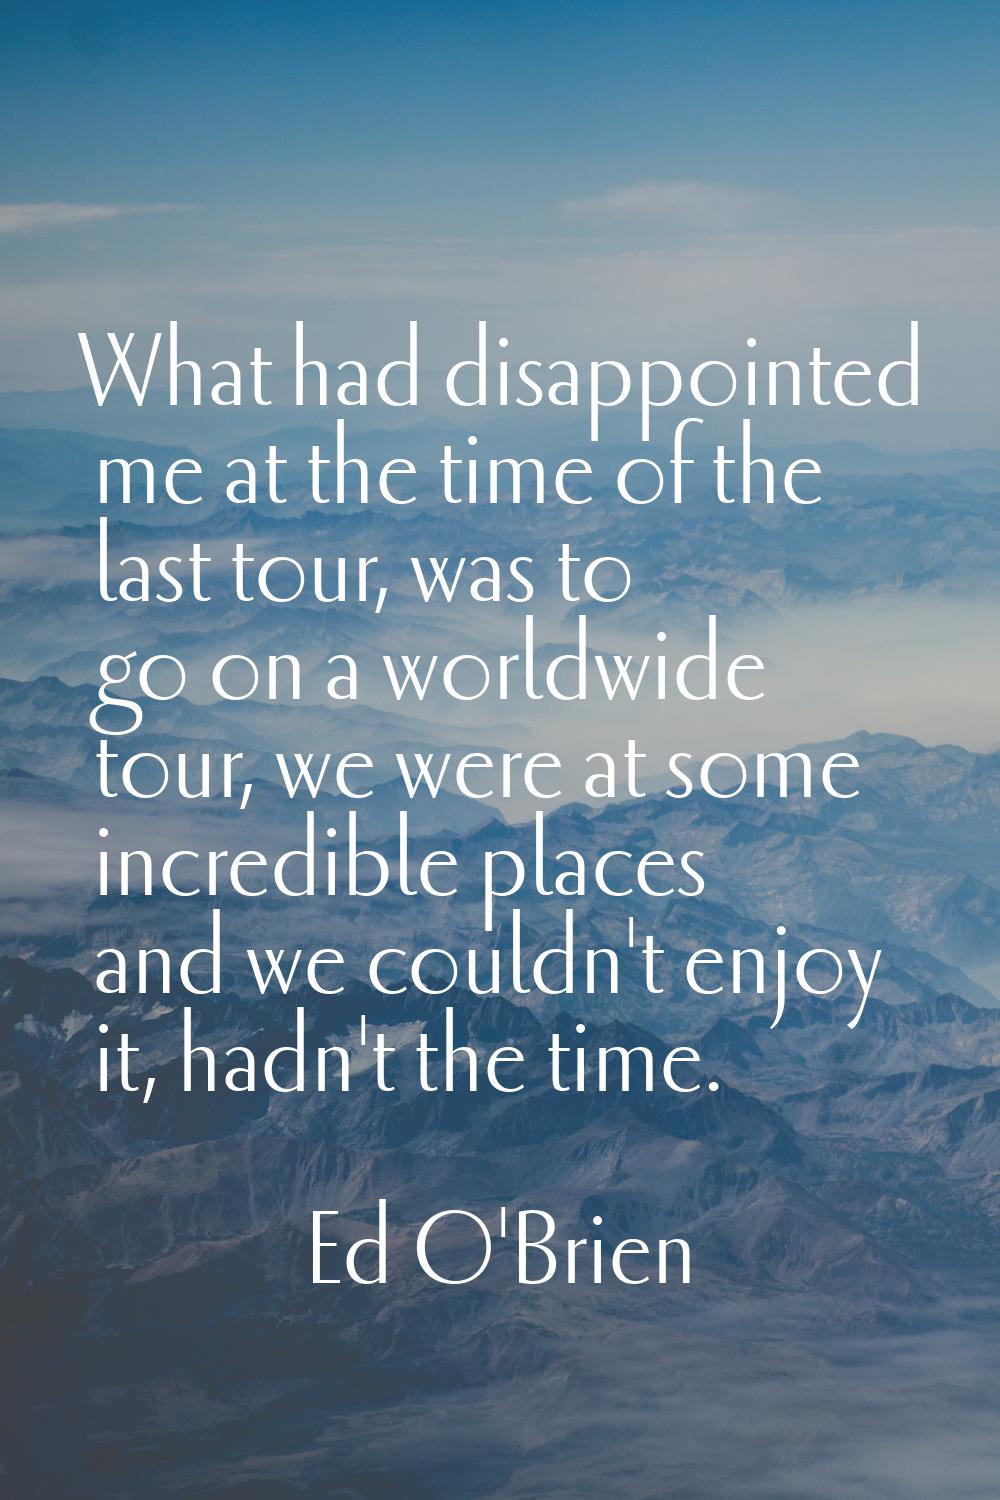 What had disappointed me at the time of the last tour, was to go on a worldwide tour, we were at so